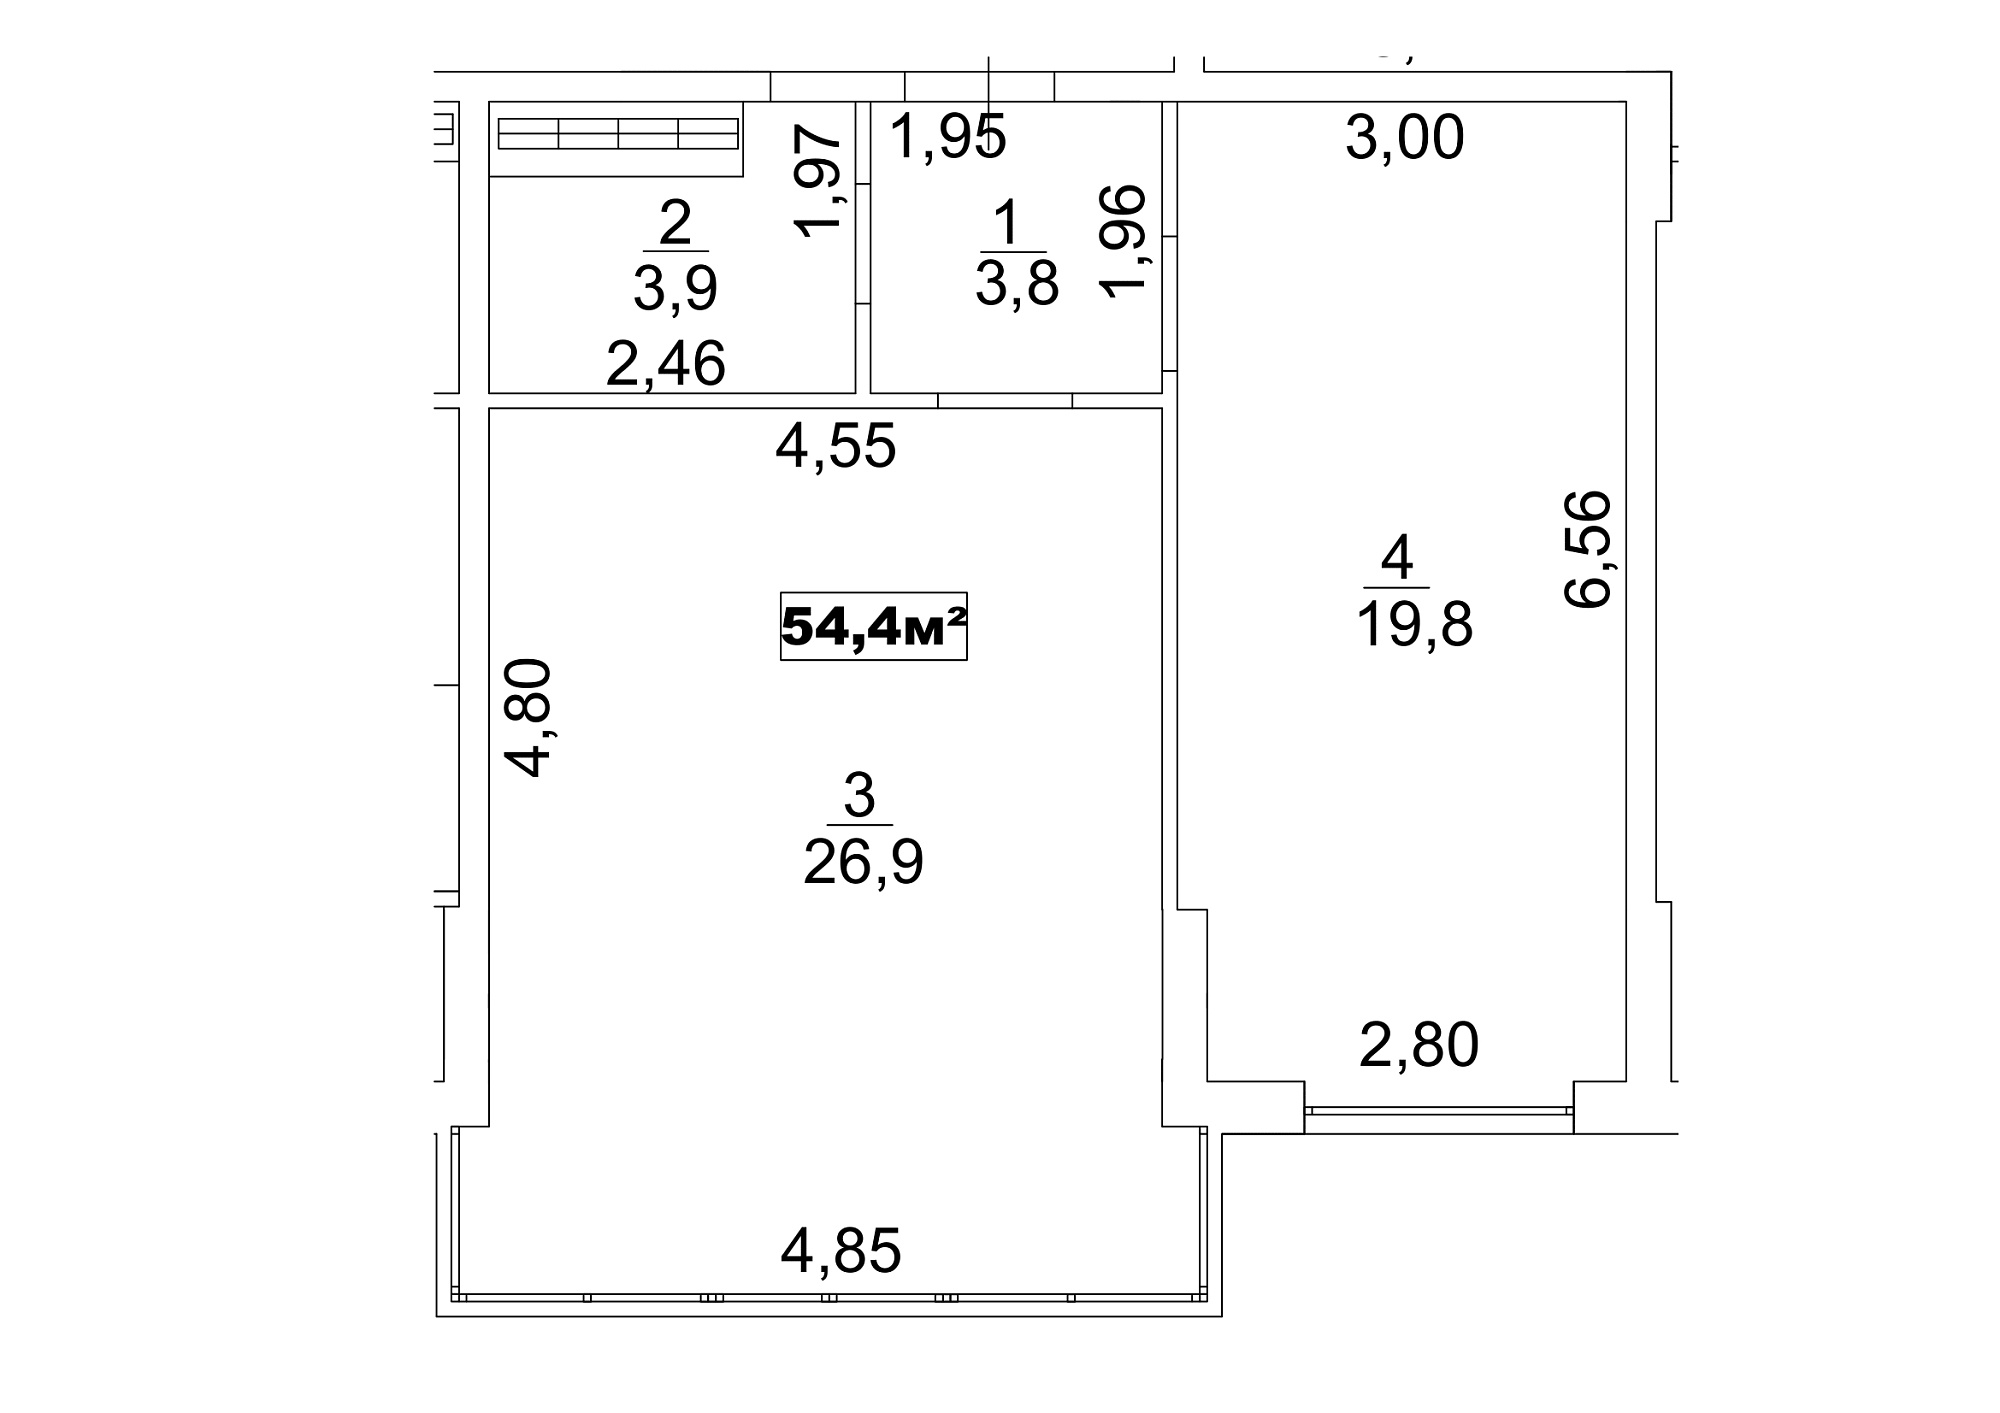 Planning 1-rm flats area 54.4m2, AB-13-07/00059.